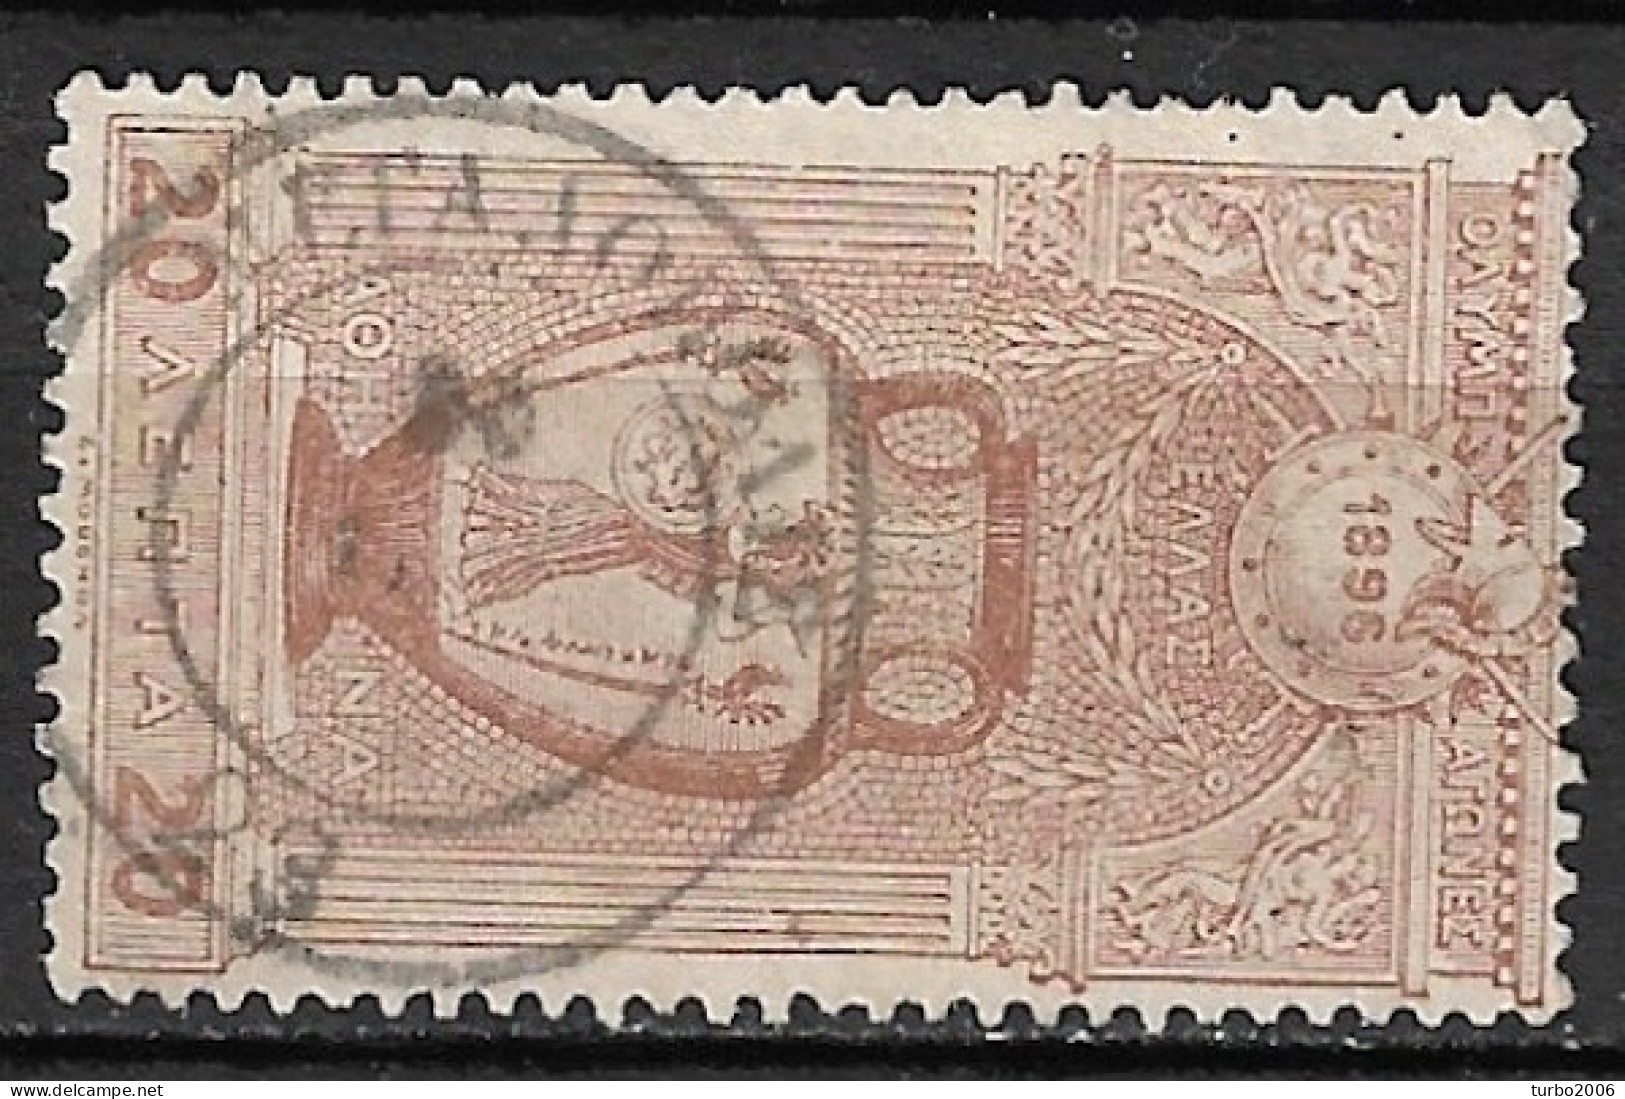 Cancellation ΜΕΓΑΛΟΠΟΛΙΣ 23 Type III On 1896 First Olympic Games 20 L Brown Vl. 137 - Used Stamps